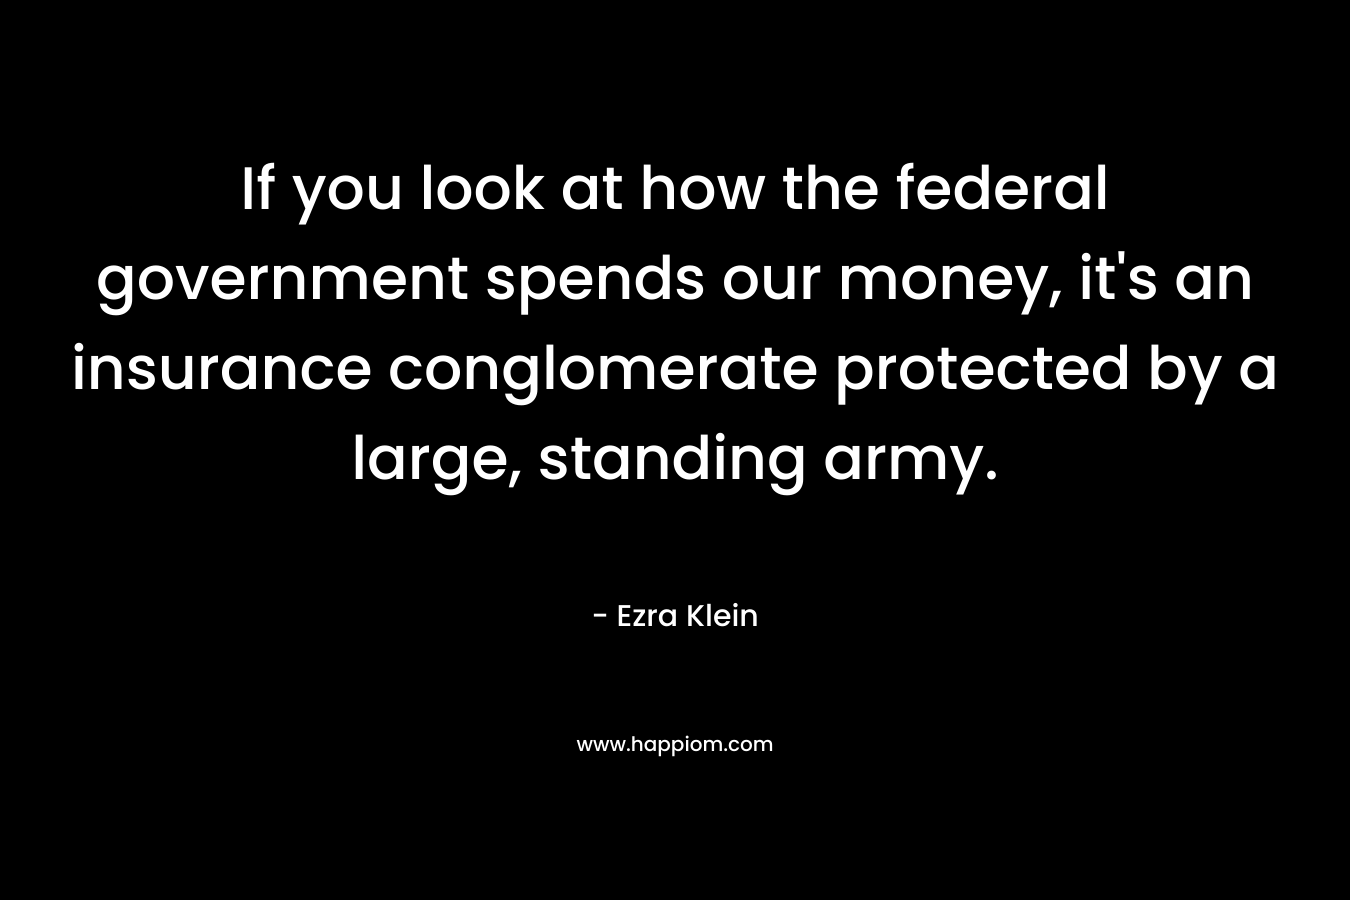 If you look at how the federal government spends our money, it’s an insurance conglomerate protected by a large, standing army. – Ezra Klein